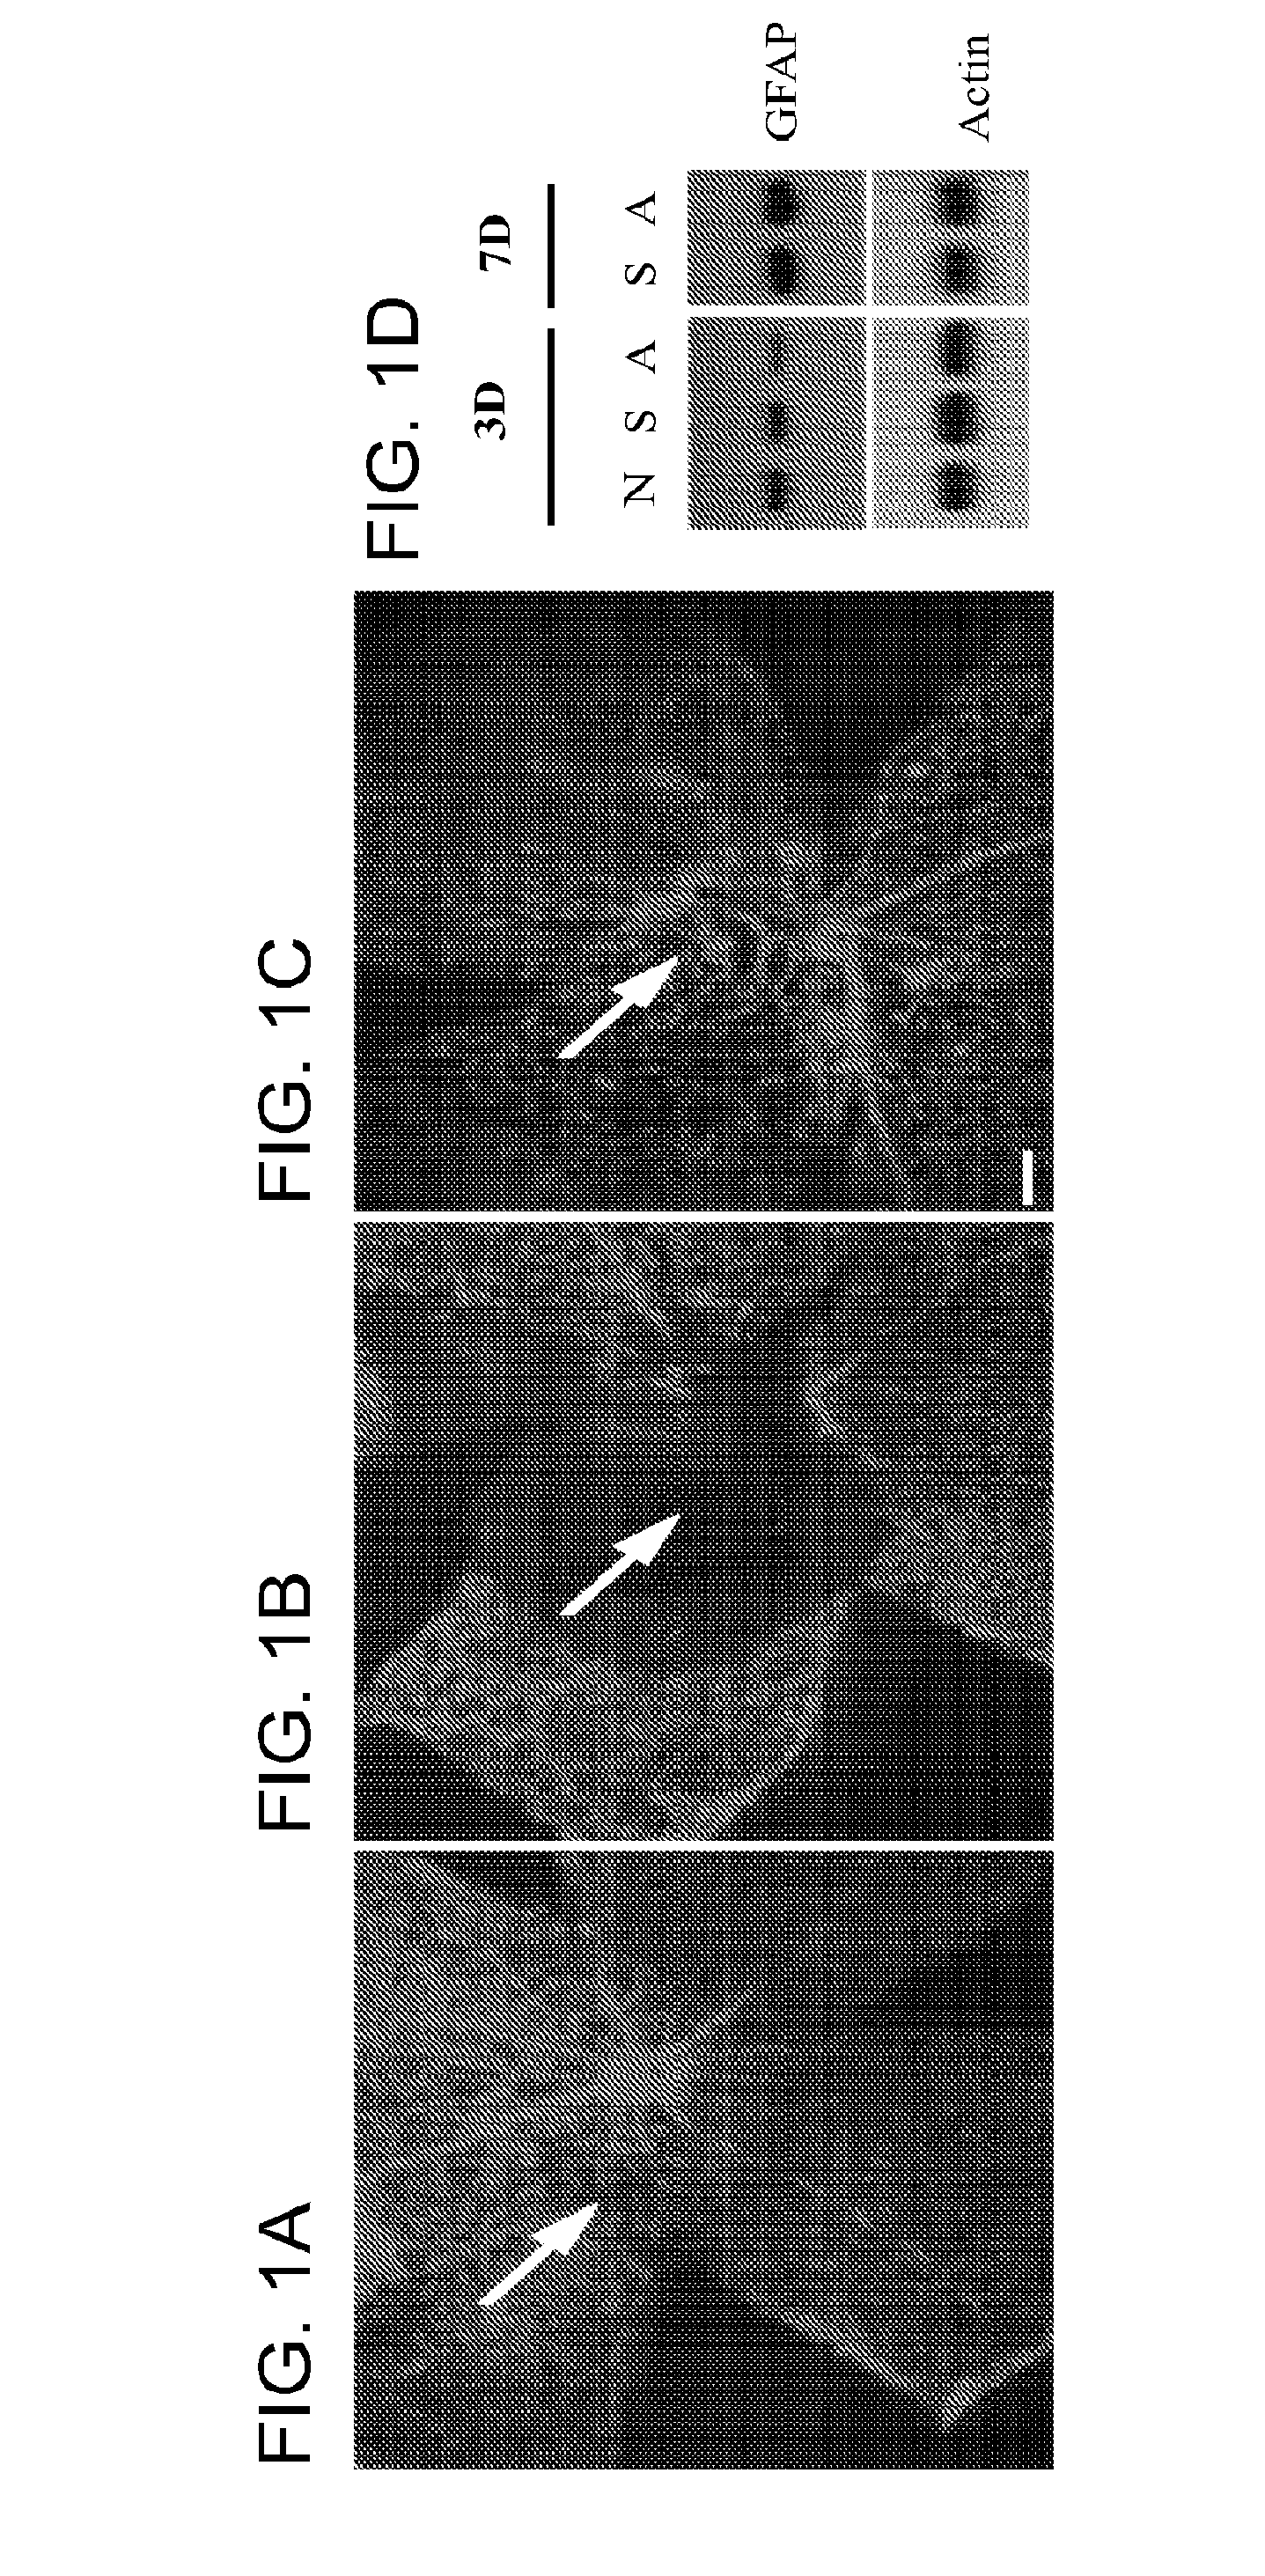 Alpha-Aminoadipate For Treatment Of Vision Loss And Restoring Sight